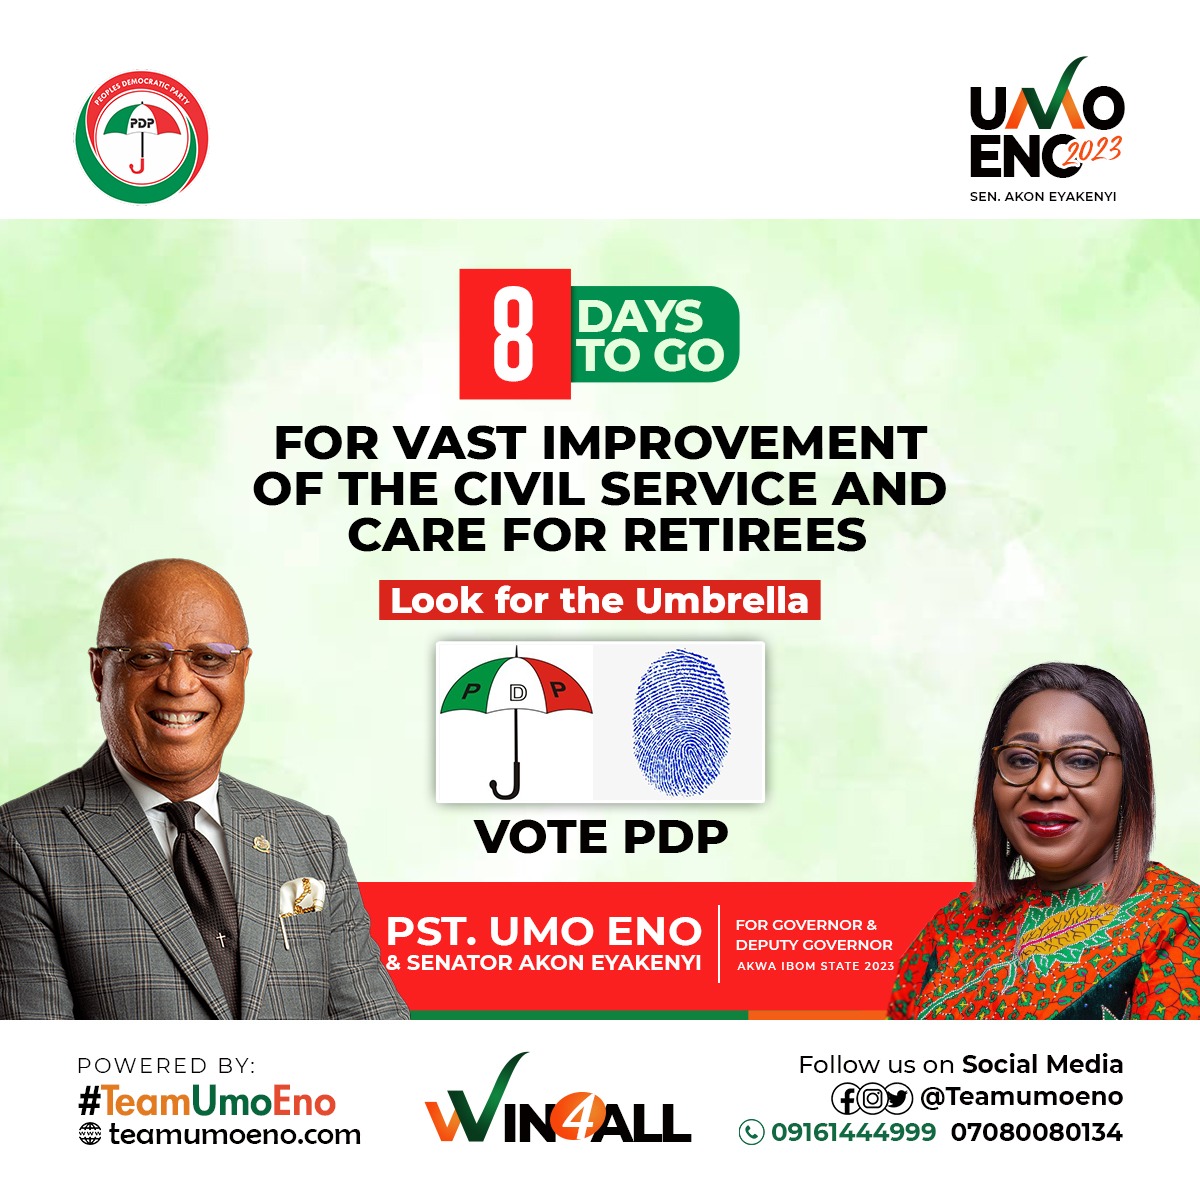 8 DAYS TO GO… 
A VOTE FOR PDP IS A WIN4ALL. Trust PDP with your vote. VOTE PDP FOR UMOENO. 

LET’S ARISE AND VOTE UMO ENO & AKON EYAKENYI FOR GOVERNOR & DEPUTY GOVERNOR AKWA IBOM STATE 2023. 

AKWA-IBOM STATE IS PDP.

#umoeno2023
#UmoEnoGovernor2023
#AkwaIbomIsPDP
#teamumoeno